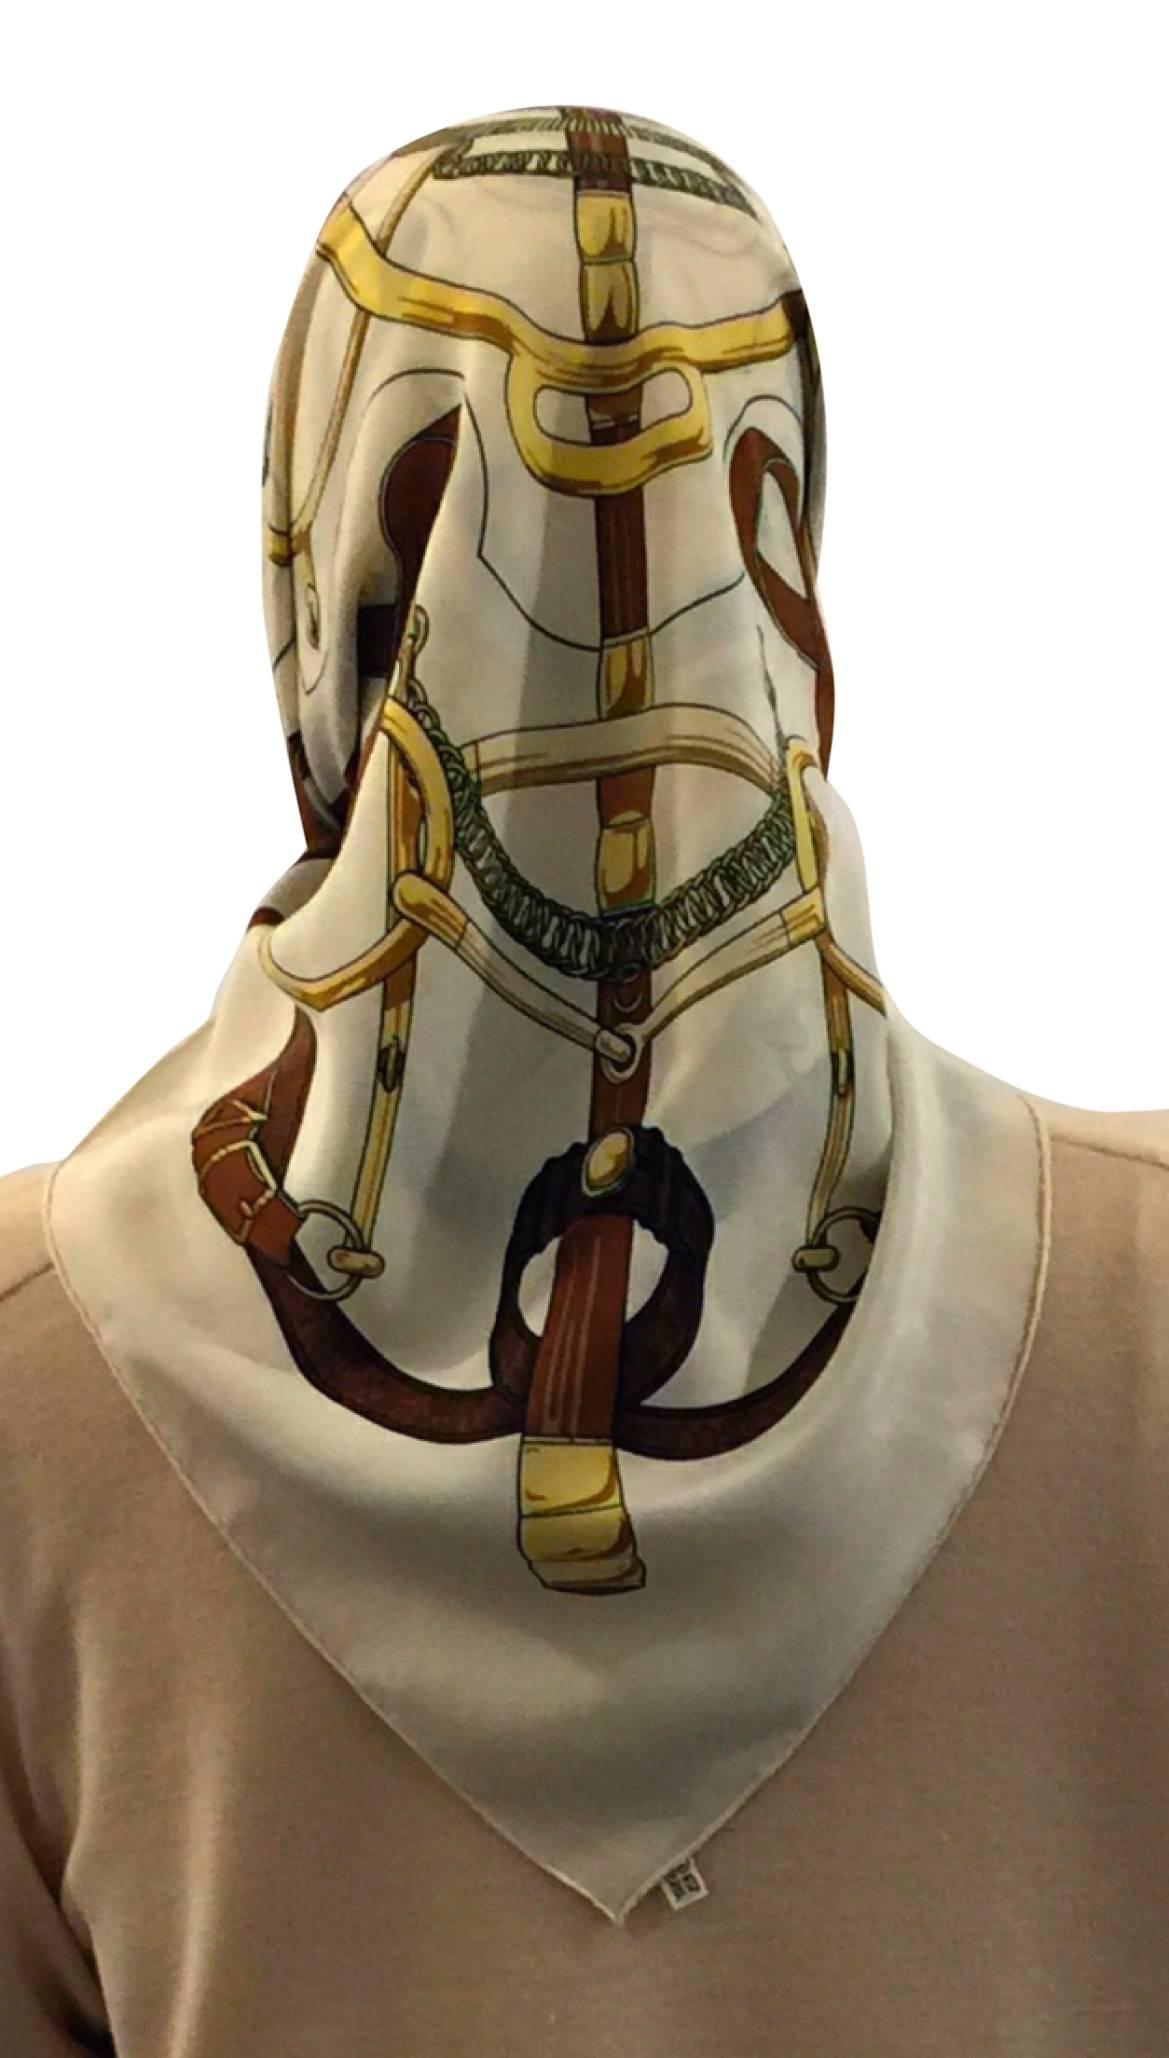 Hermes Crepe-de-Chene Silk Scarf .  Vintage Collector’s Item.  100% Silk.  Colors - Cream Base with Brown & Gold.  Size 91cm square.  This Elegant Scarf reflects the quality and refinement Hermes is renowned for.  Material 100% Silk.  Original Silk